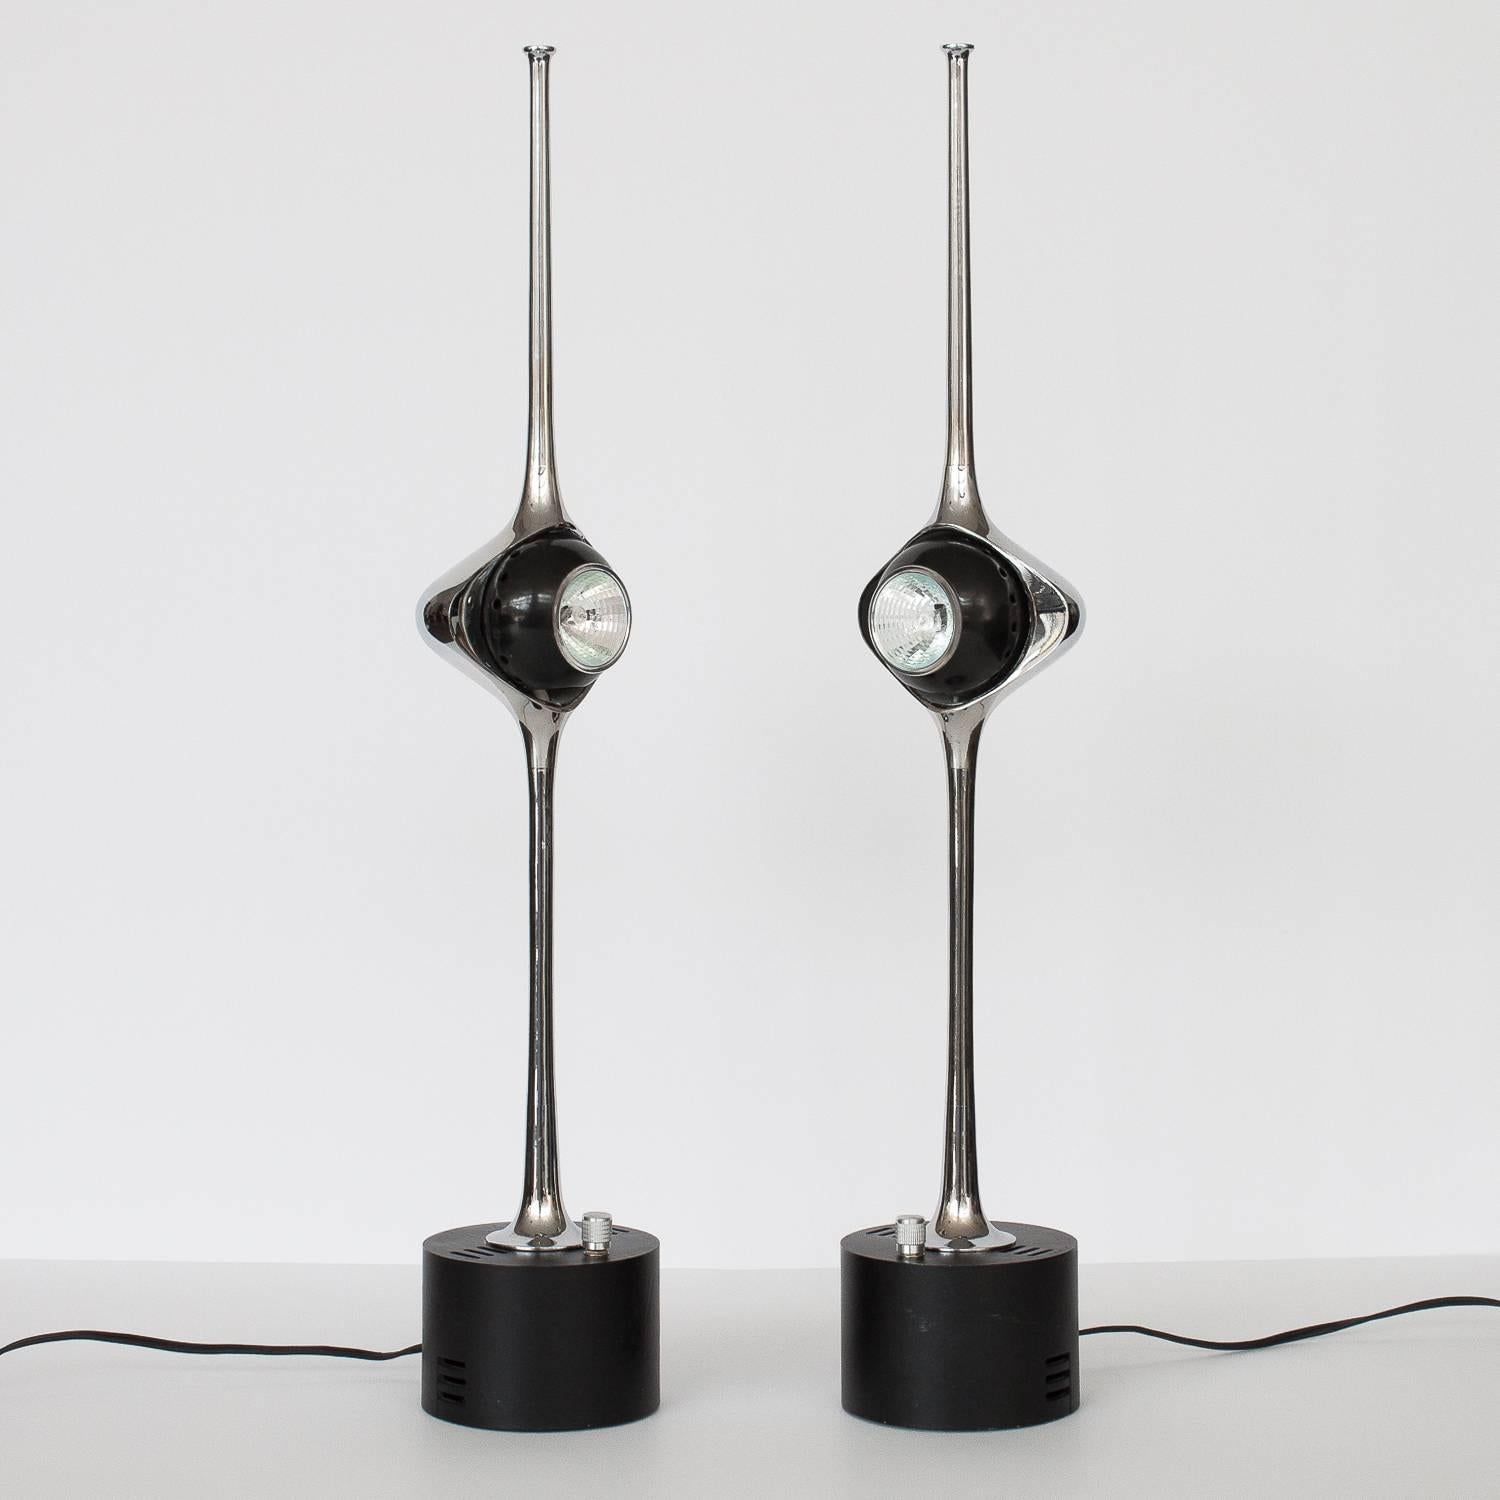 Rare and spectacular pair of Angelo Lelli Cobra lamps for Arredoluce. Chrome-plated brass sculptural form. Metal black enameled cylinder base. Adjustable pivoting magnetic metal shade ball socket. Rotary dimmable on/off switch on base. Working